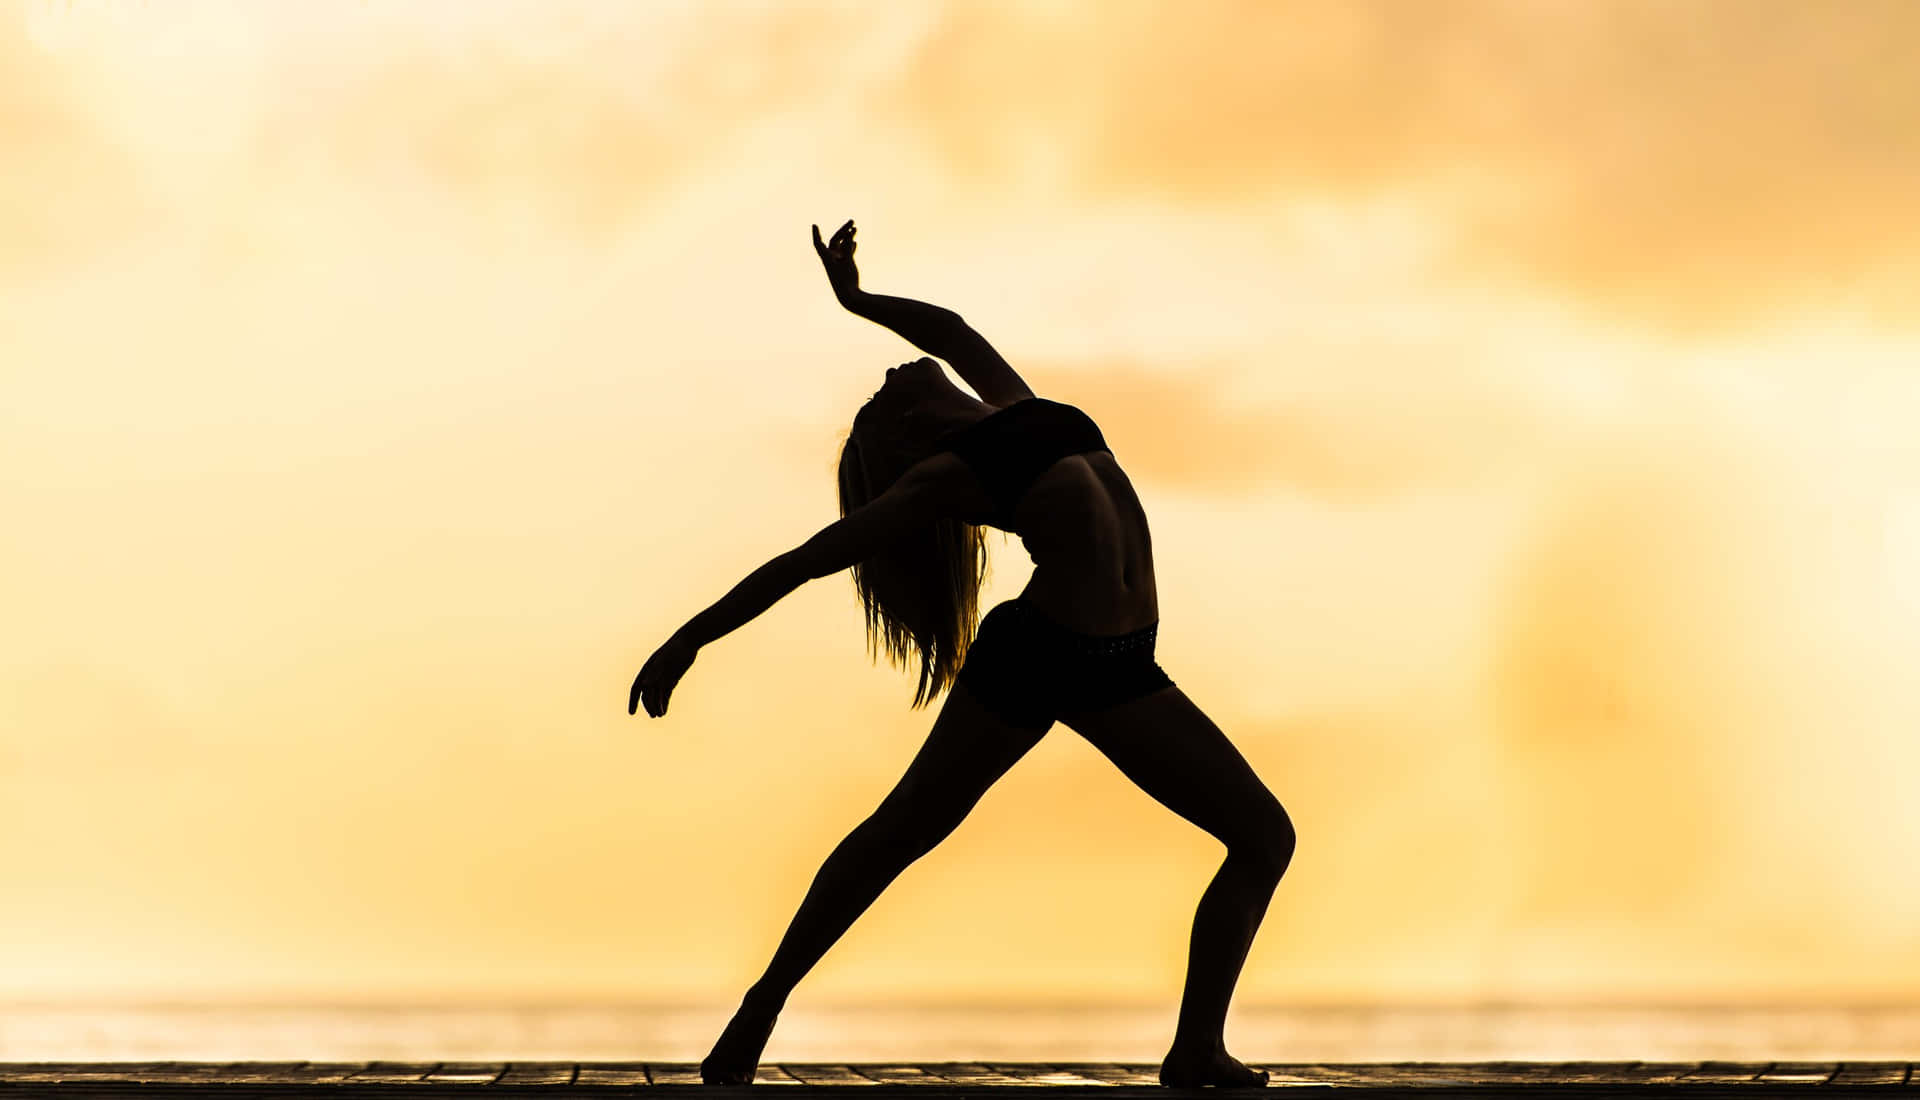 Silhouette Of A Woman Doing Yoga At Sunset